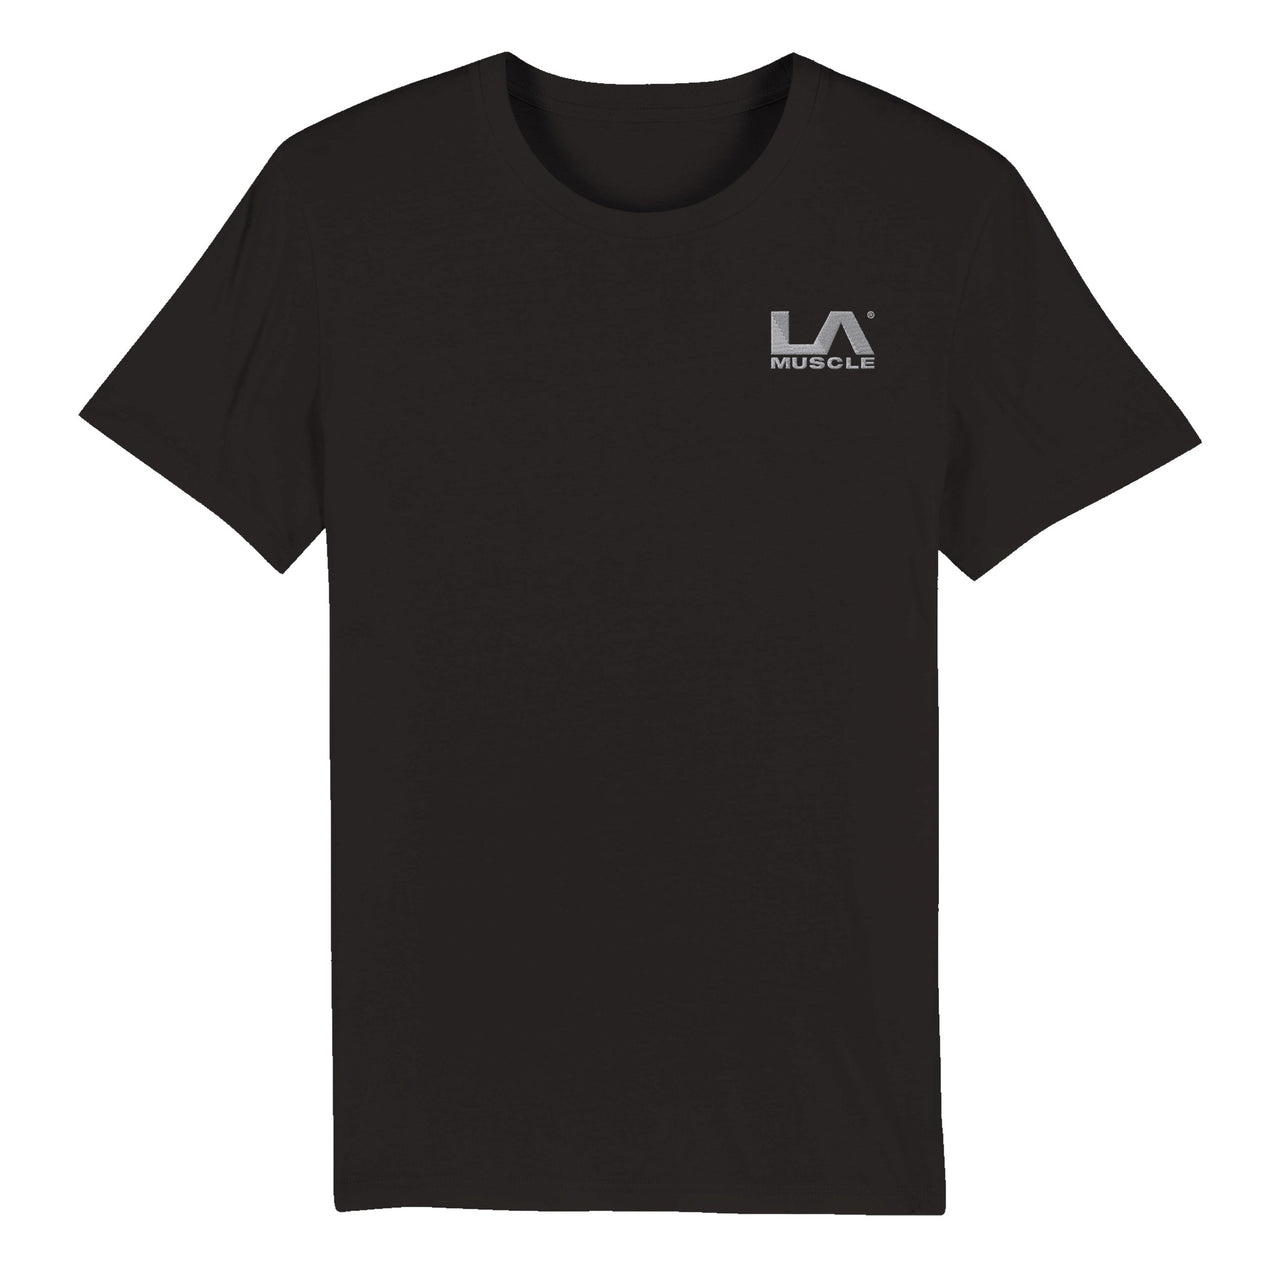 LA MUSCLE Official EMBROIDERED White Logo Organic Unisex Crewneck T-shirt